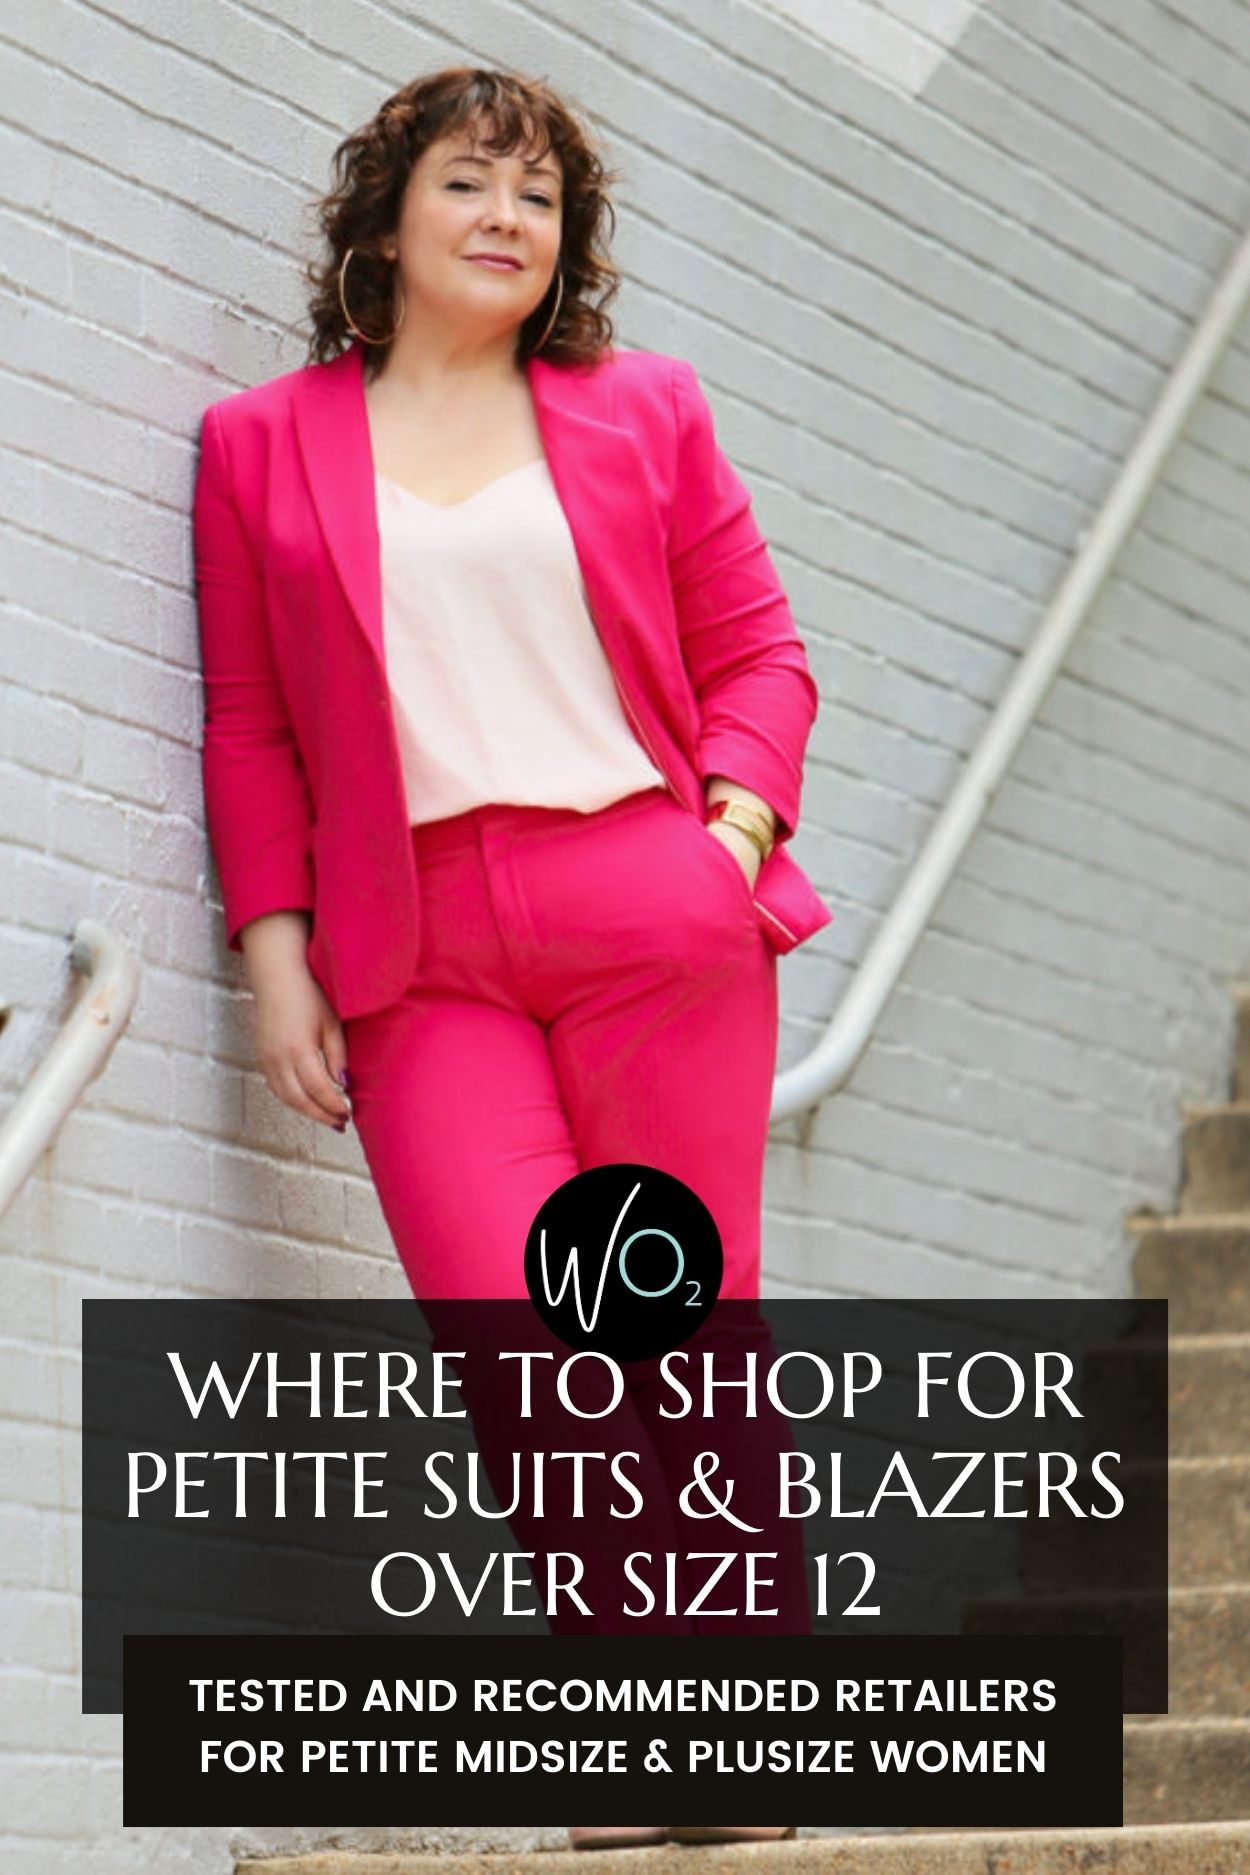 14 Stores That Sell Petite Suits over Size 12 - Wardrobe Oxygen